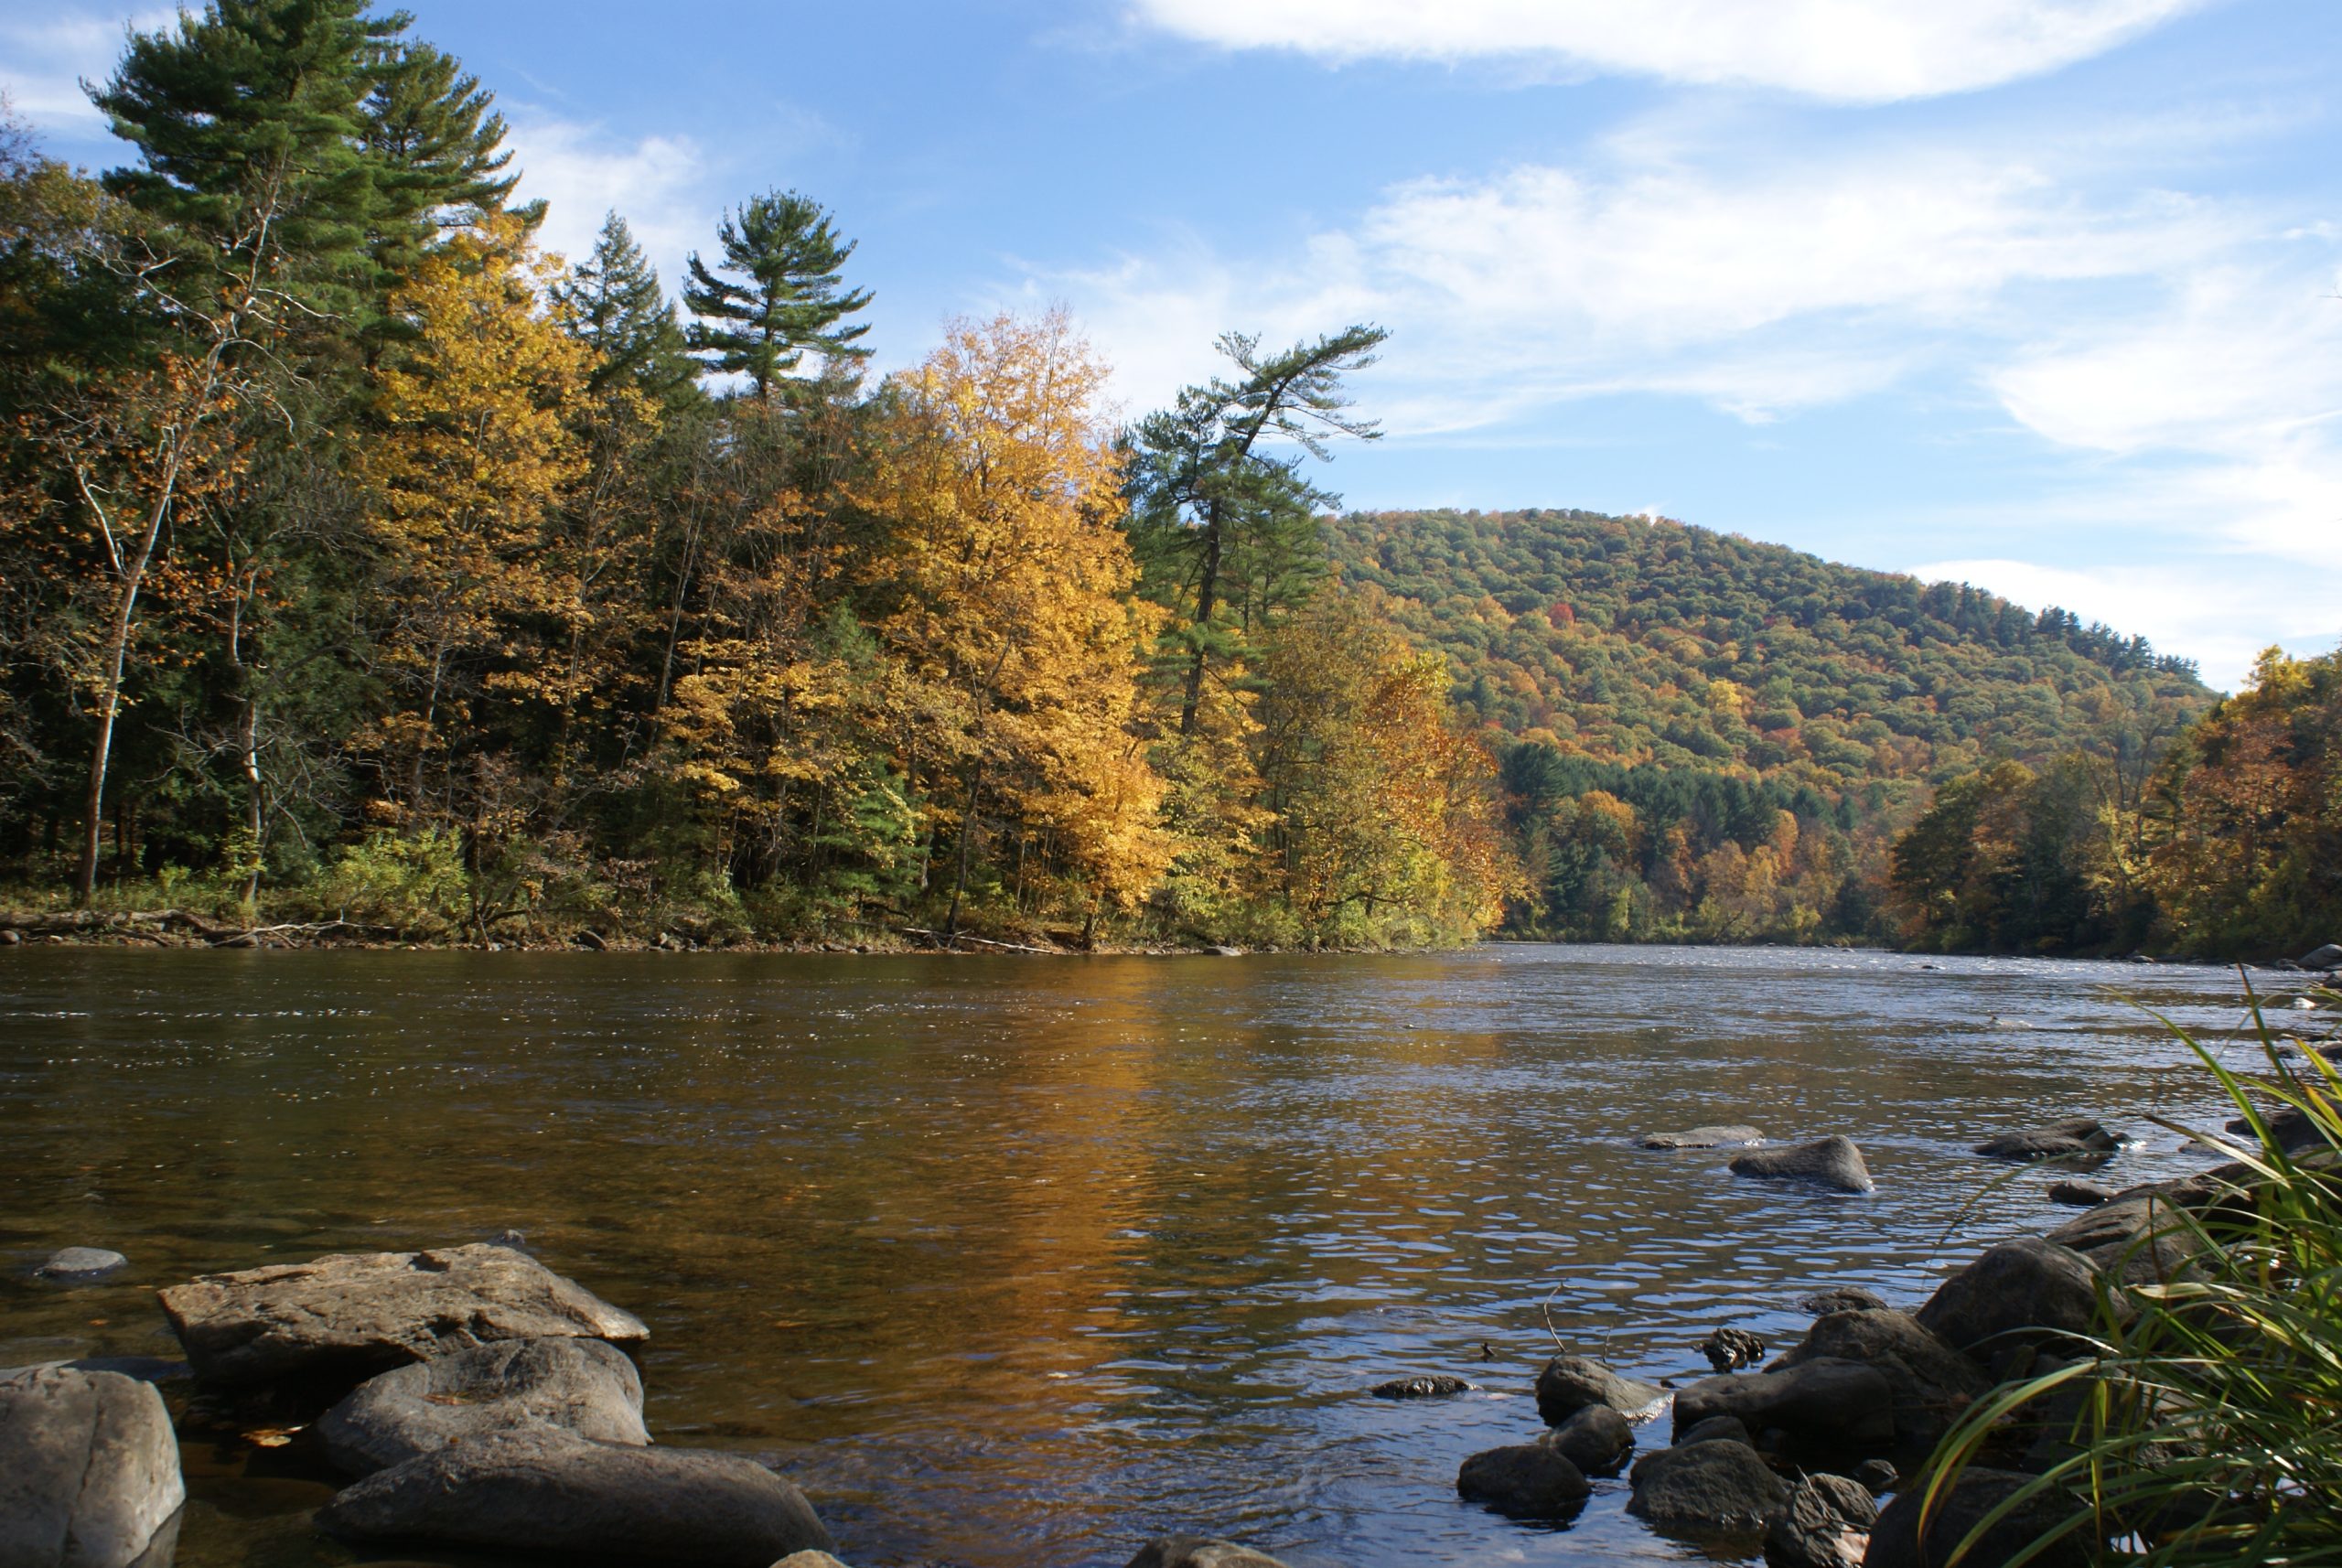 A Good Place To Fish At Fall (user submitted)